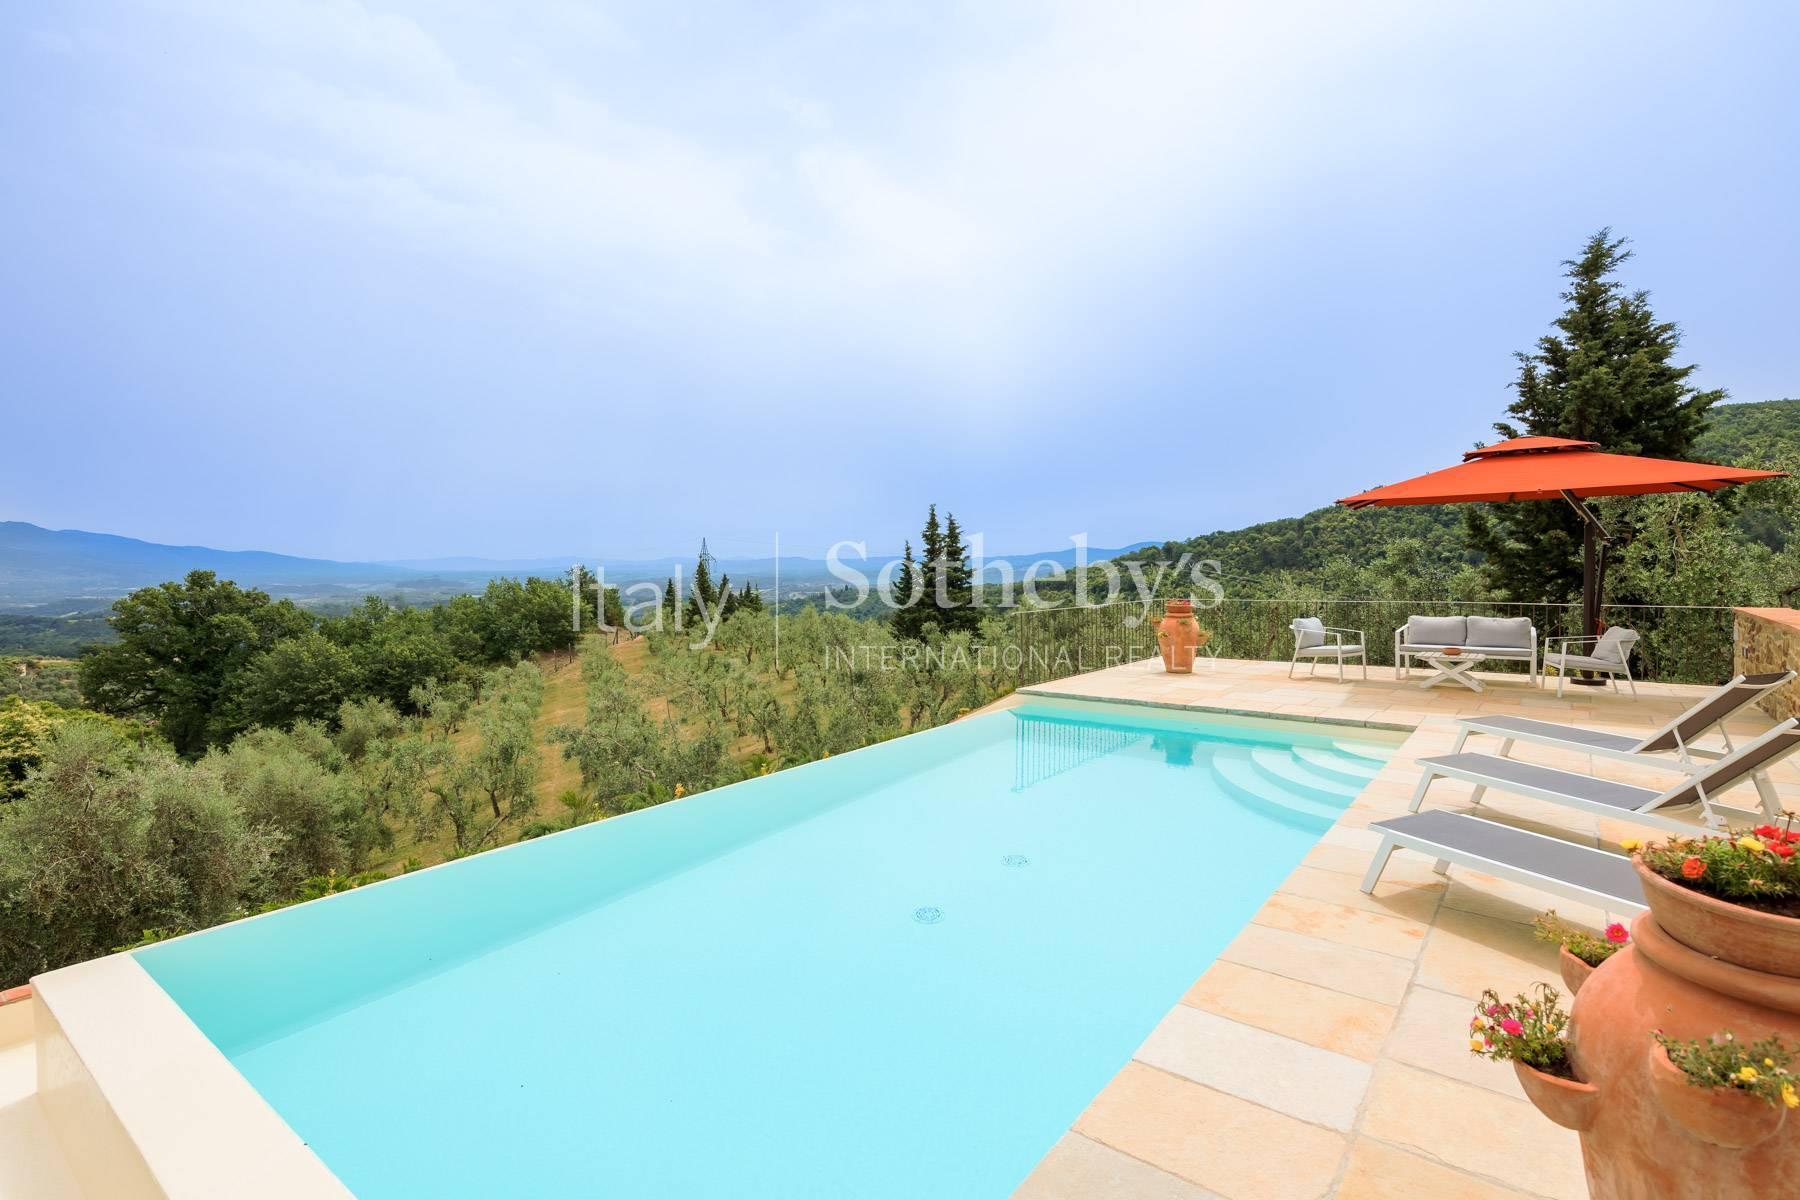 Charming property on the hills of Valdarno - 2